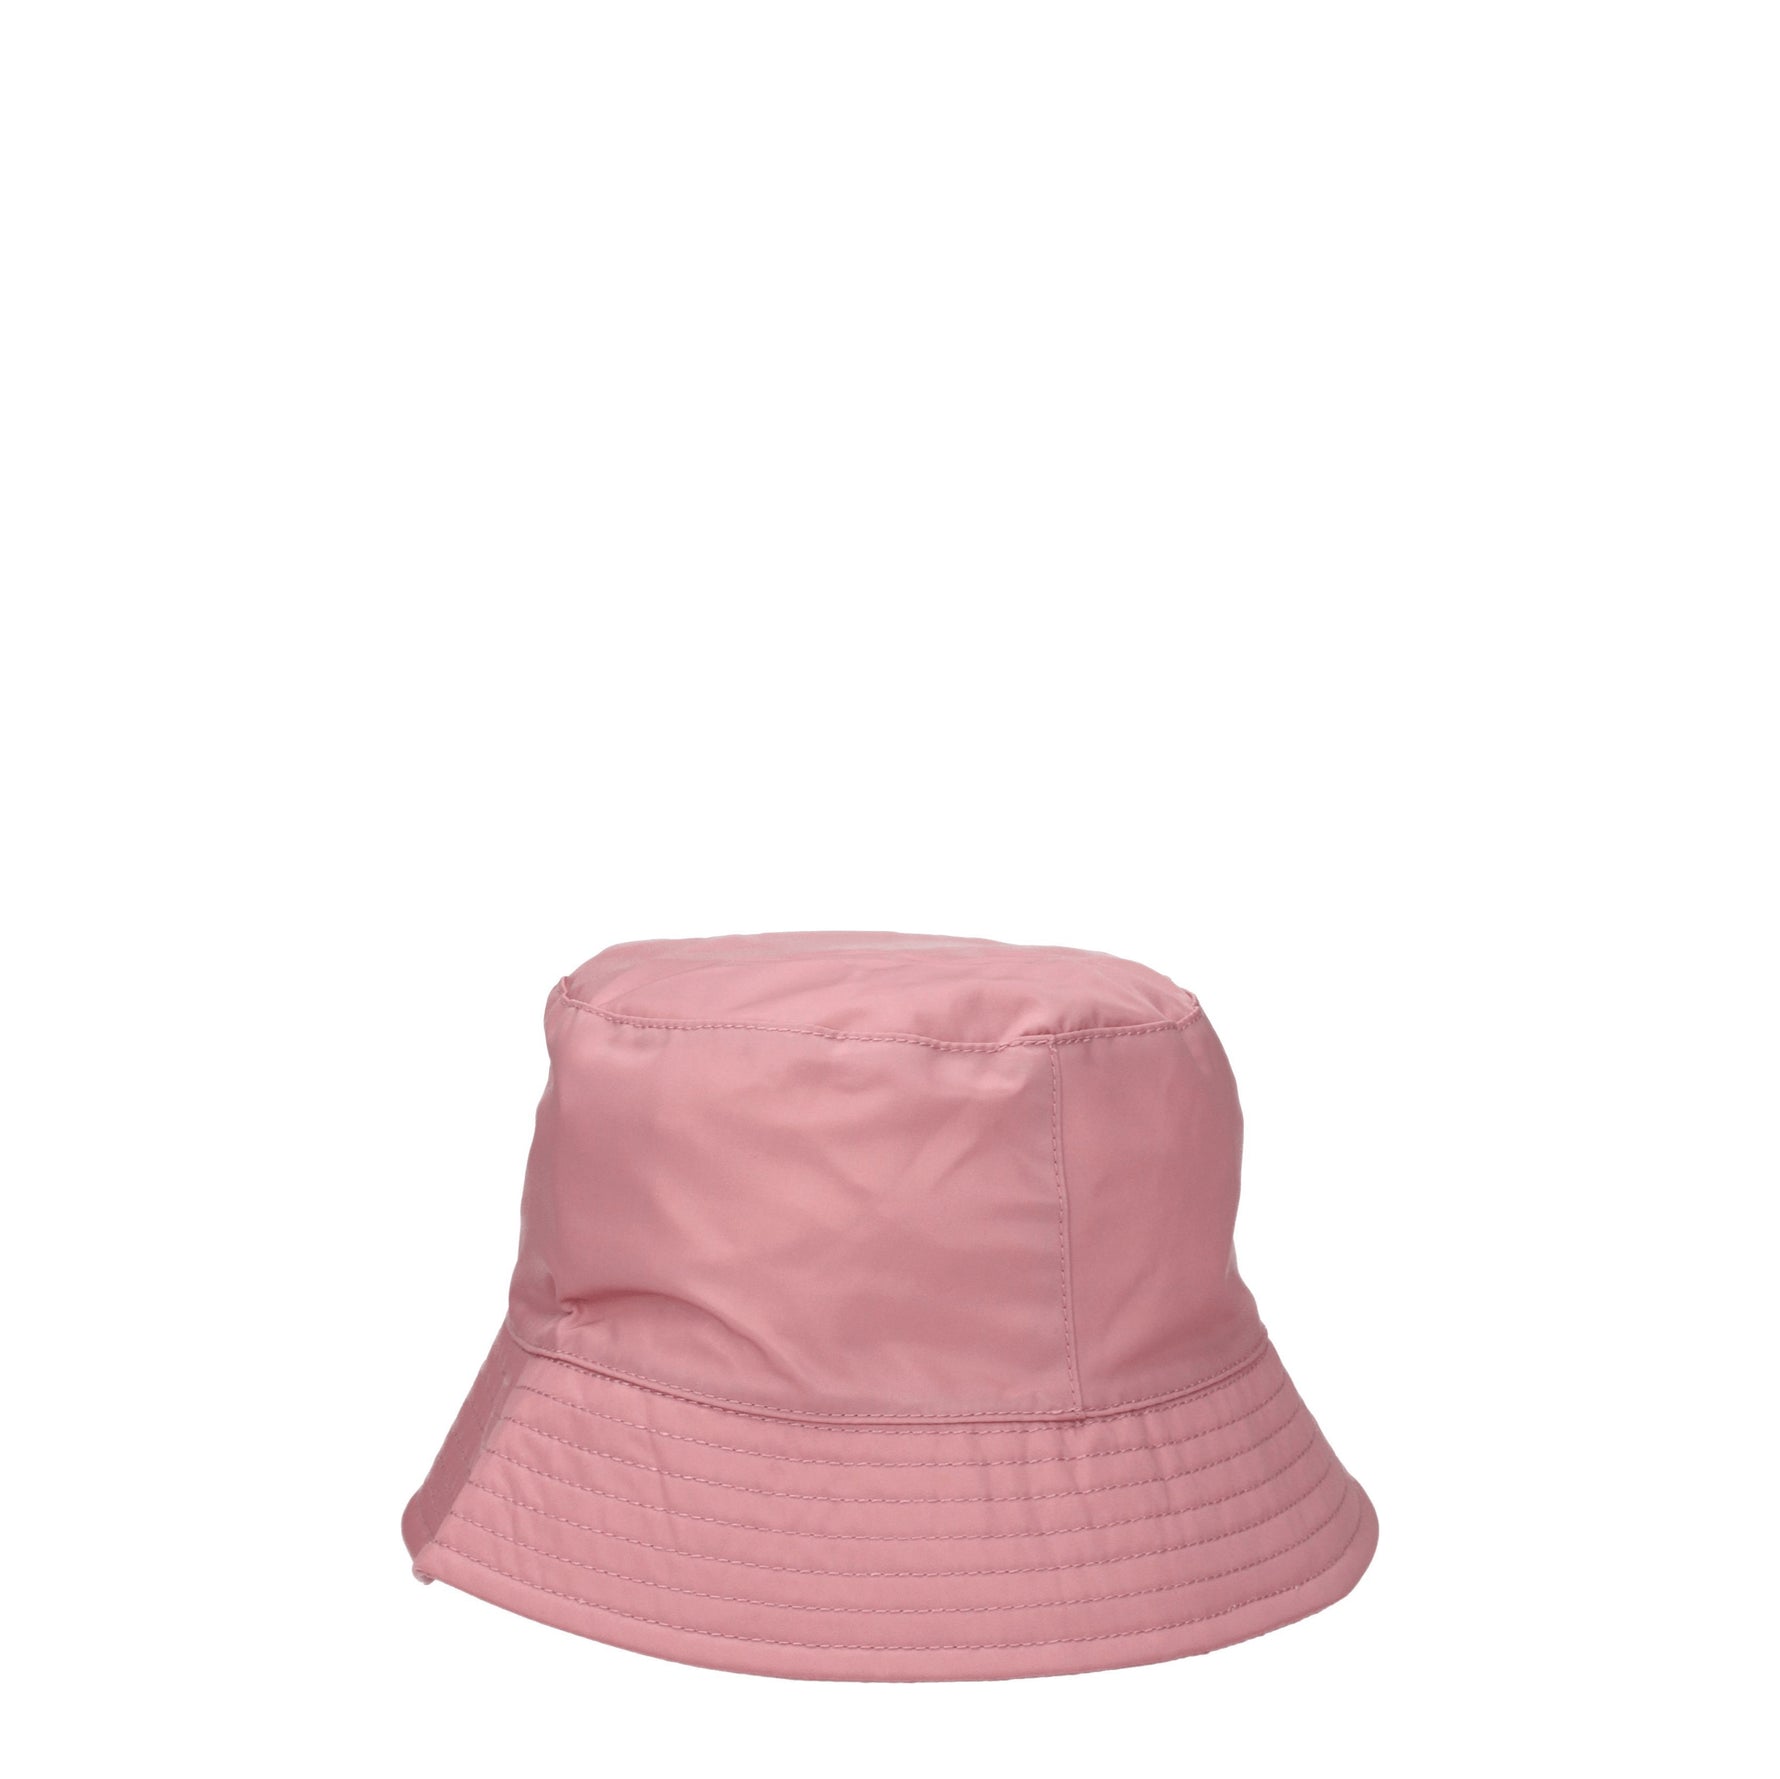 Palm Angels Cappelli Donna Poliestere Rosa Bianco